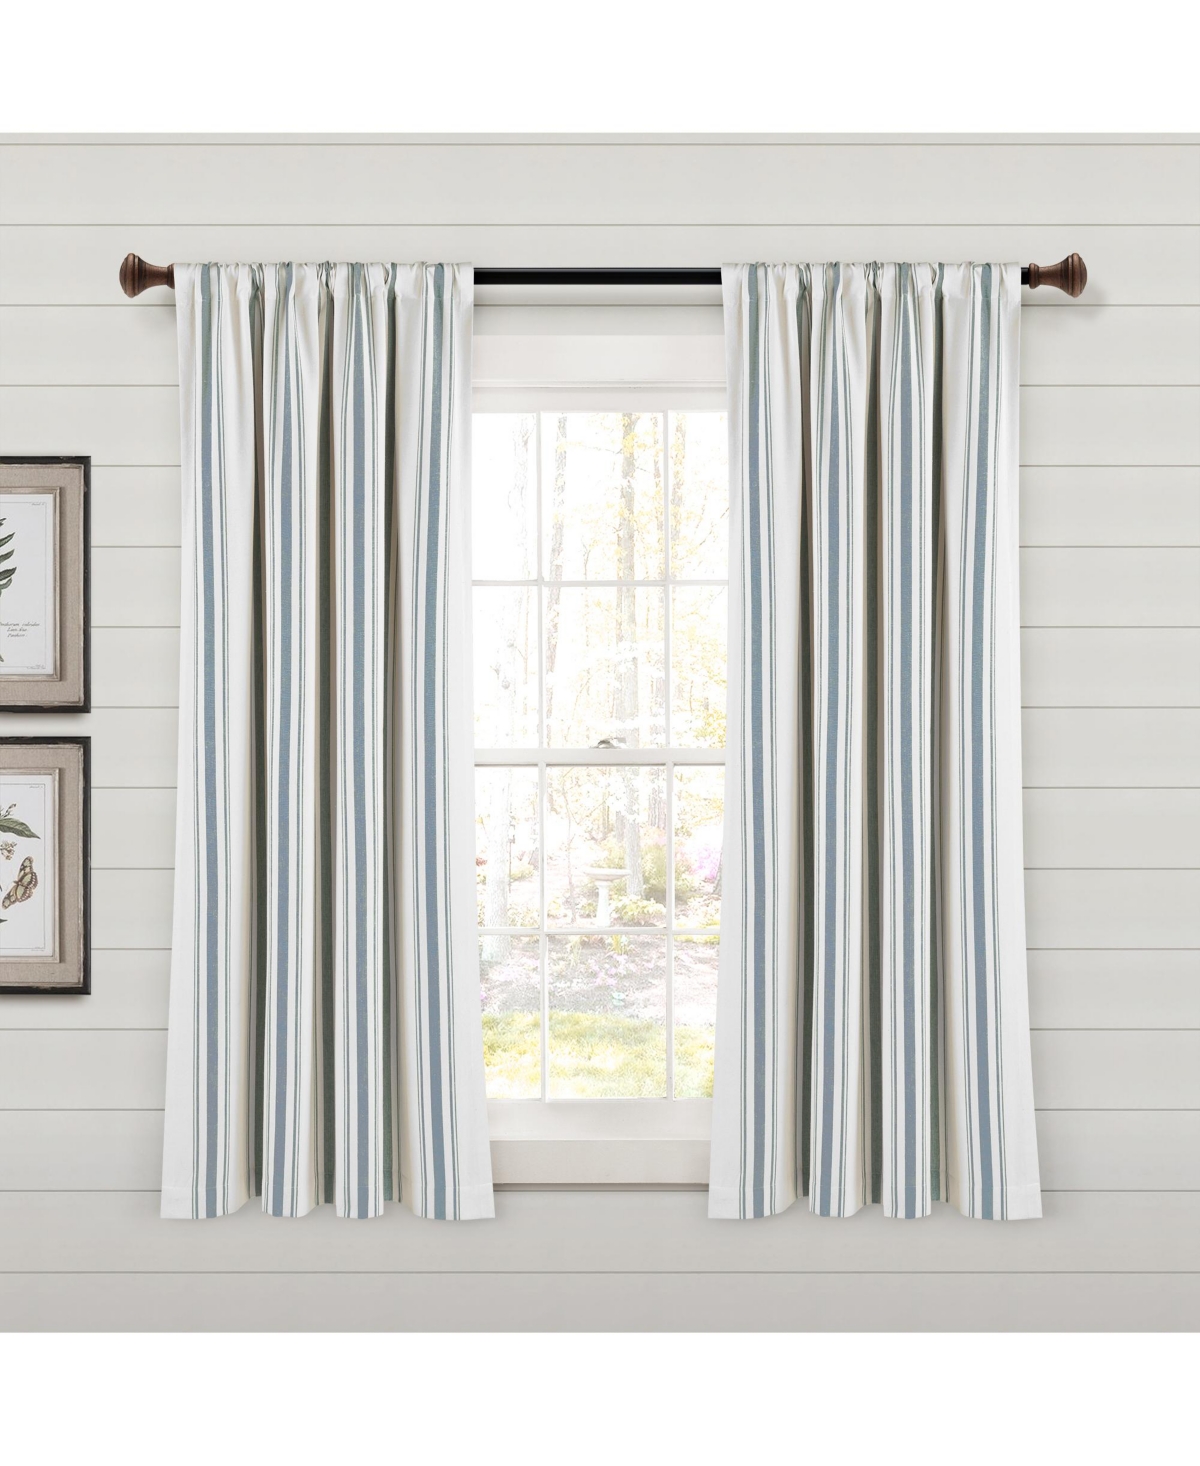 Lush Decor Farmhouse Stripe Yarn Dyed Eco-friendly Recycled Cotton Window Curtain Panels In Blue